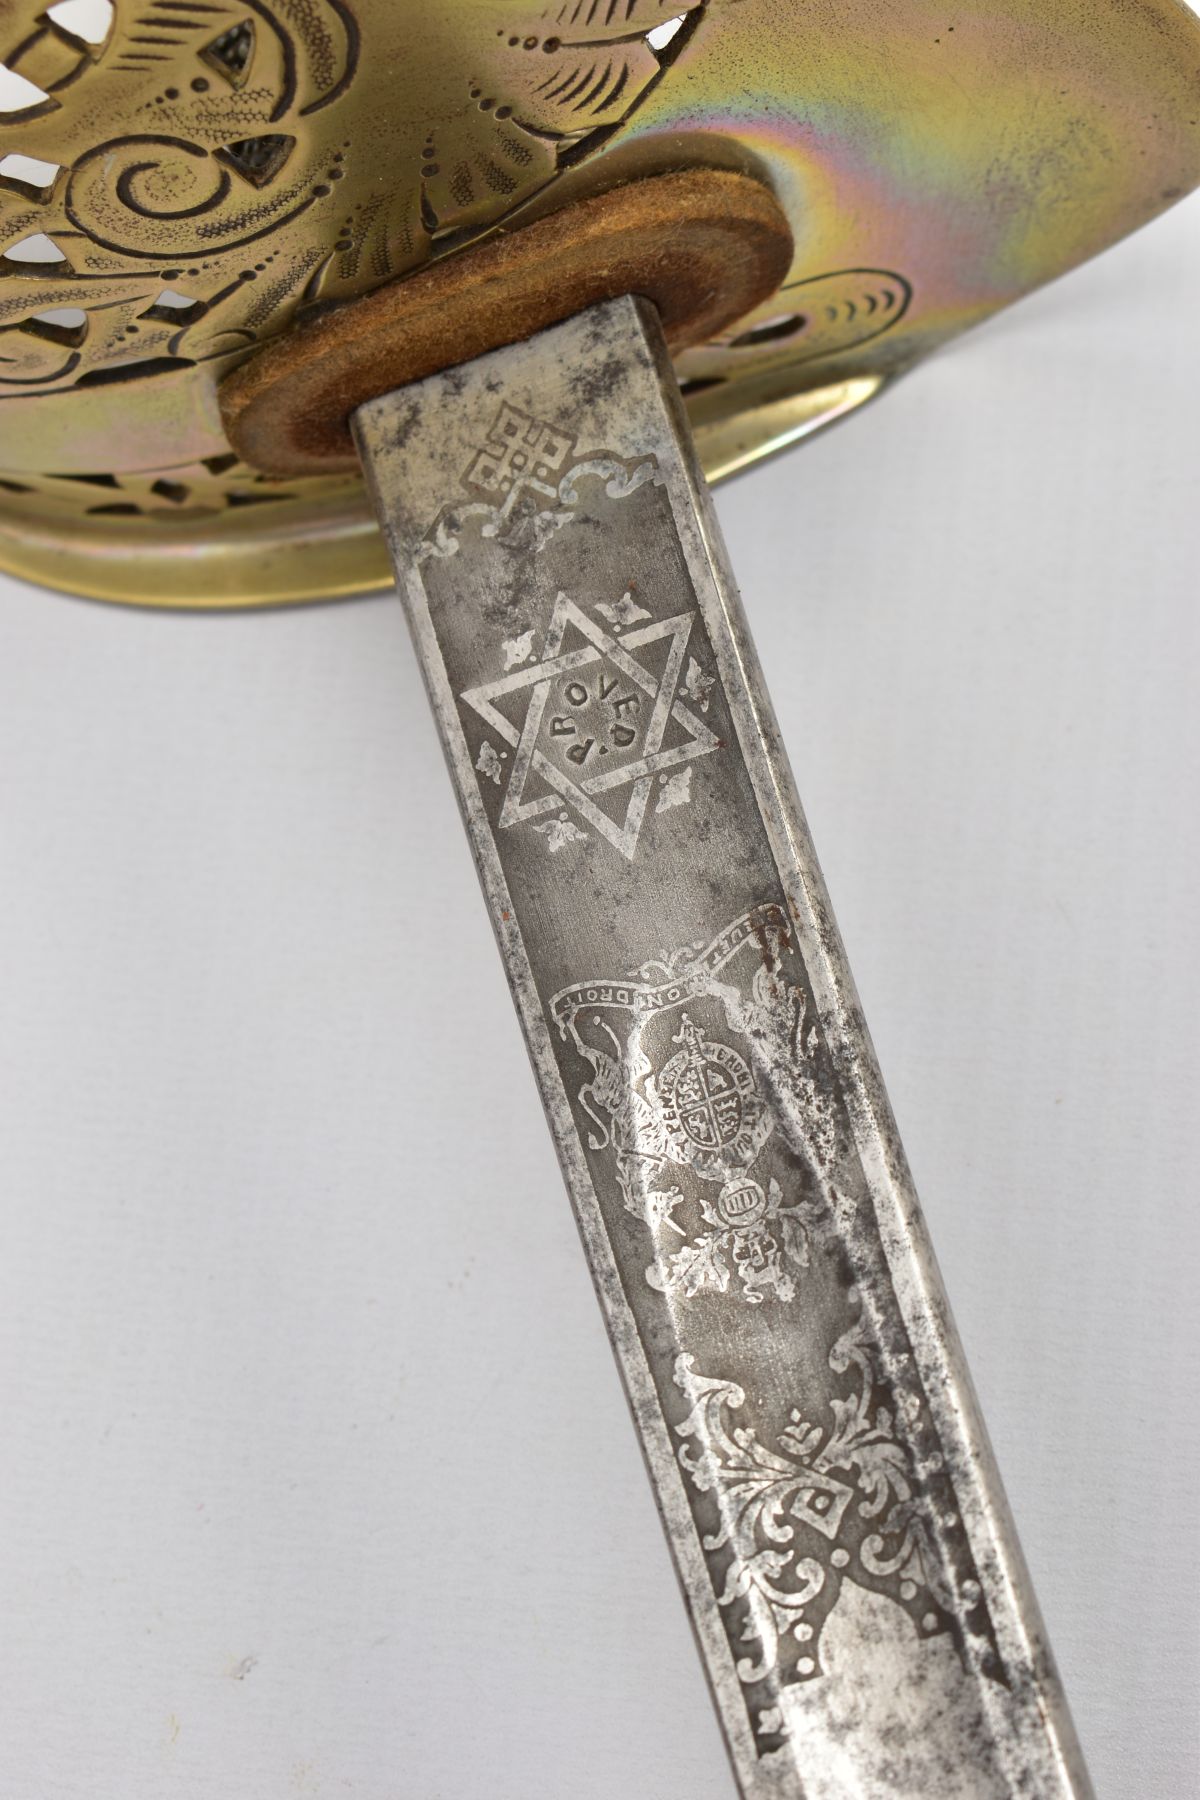 A FENTON BROTHERS LTD, SHEFFIELD 1897 PATTERN INFANTRY OFFICERS SWORD AND SCABBARD, the blade is - Image 5 of 15